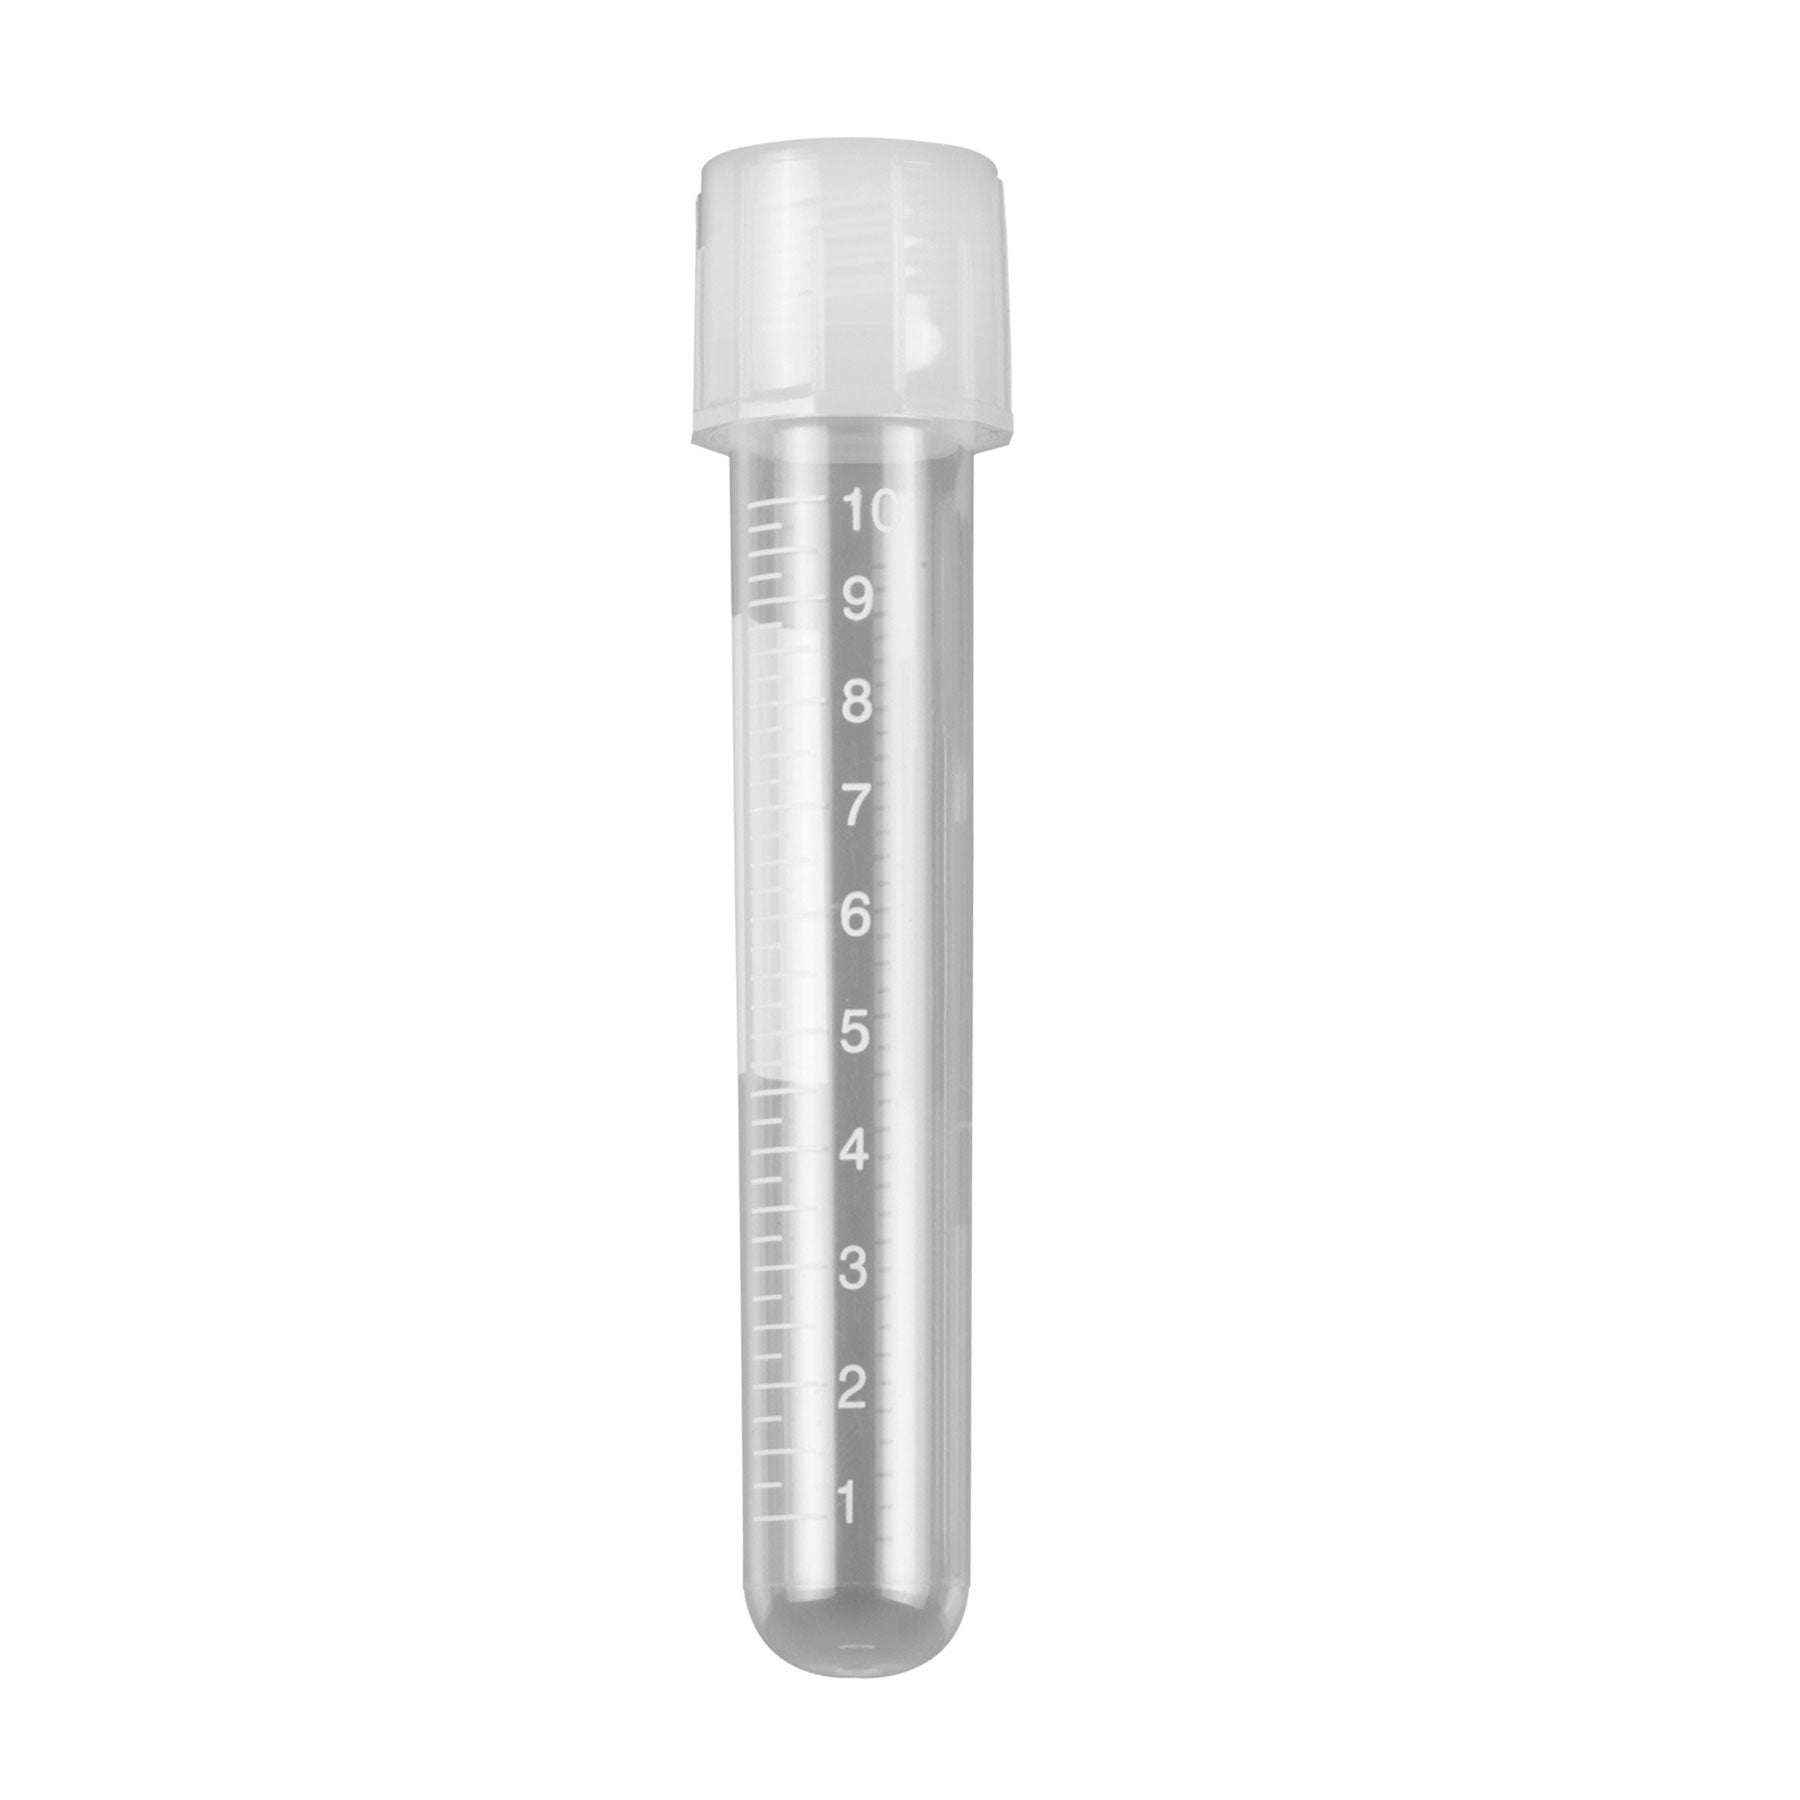 MTC Bio T8834, DuoClick Culture Tube, 14ml, 17 X 100Mm, PP, with Attached 2-Position Screw-Cap, Printed Graduations, Sterile, Individually Wrapped, 500/Case